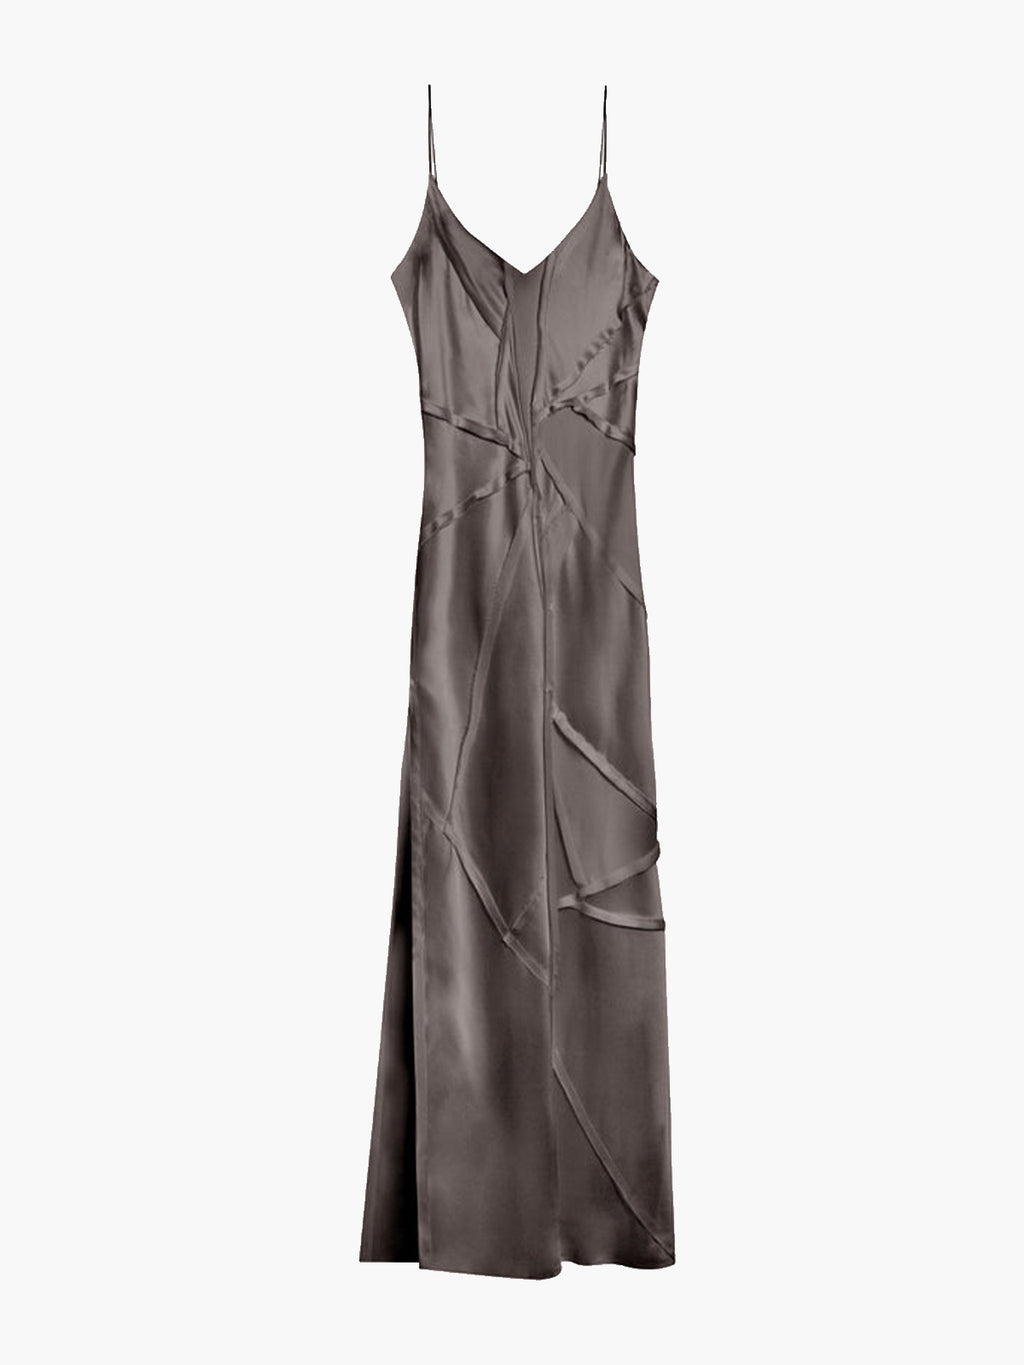 Elongated Recycled Dress with Slit | Ash